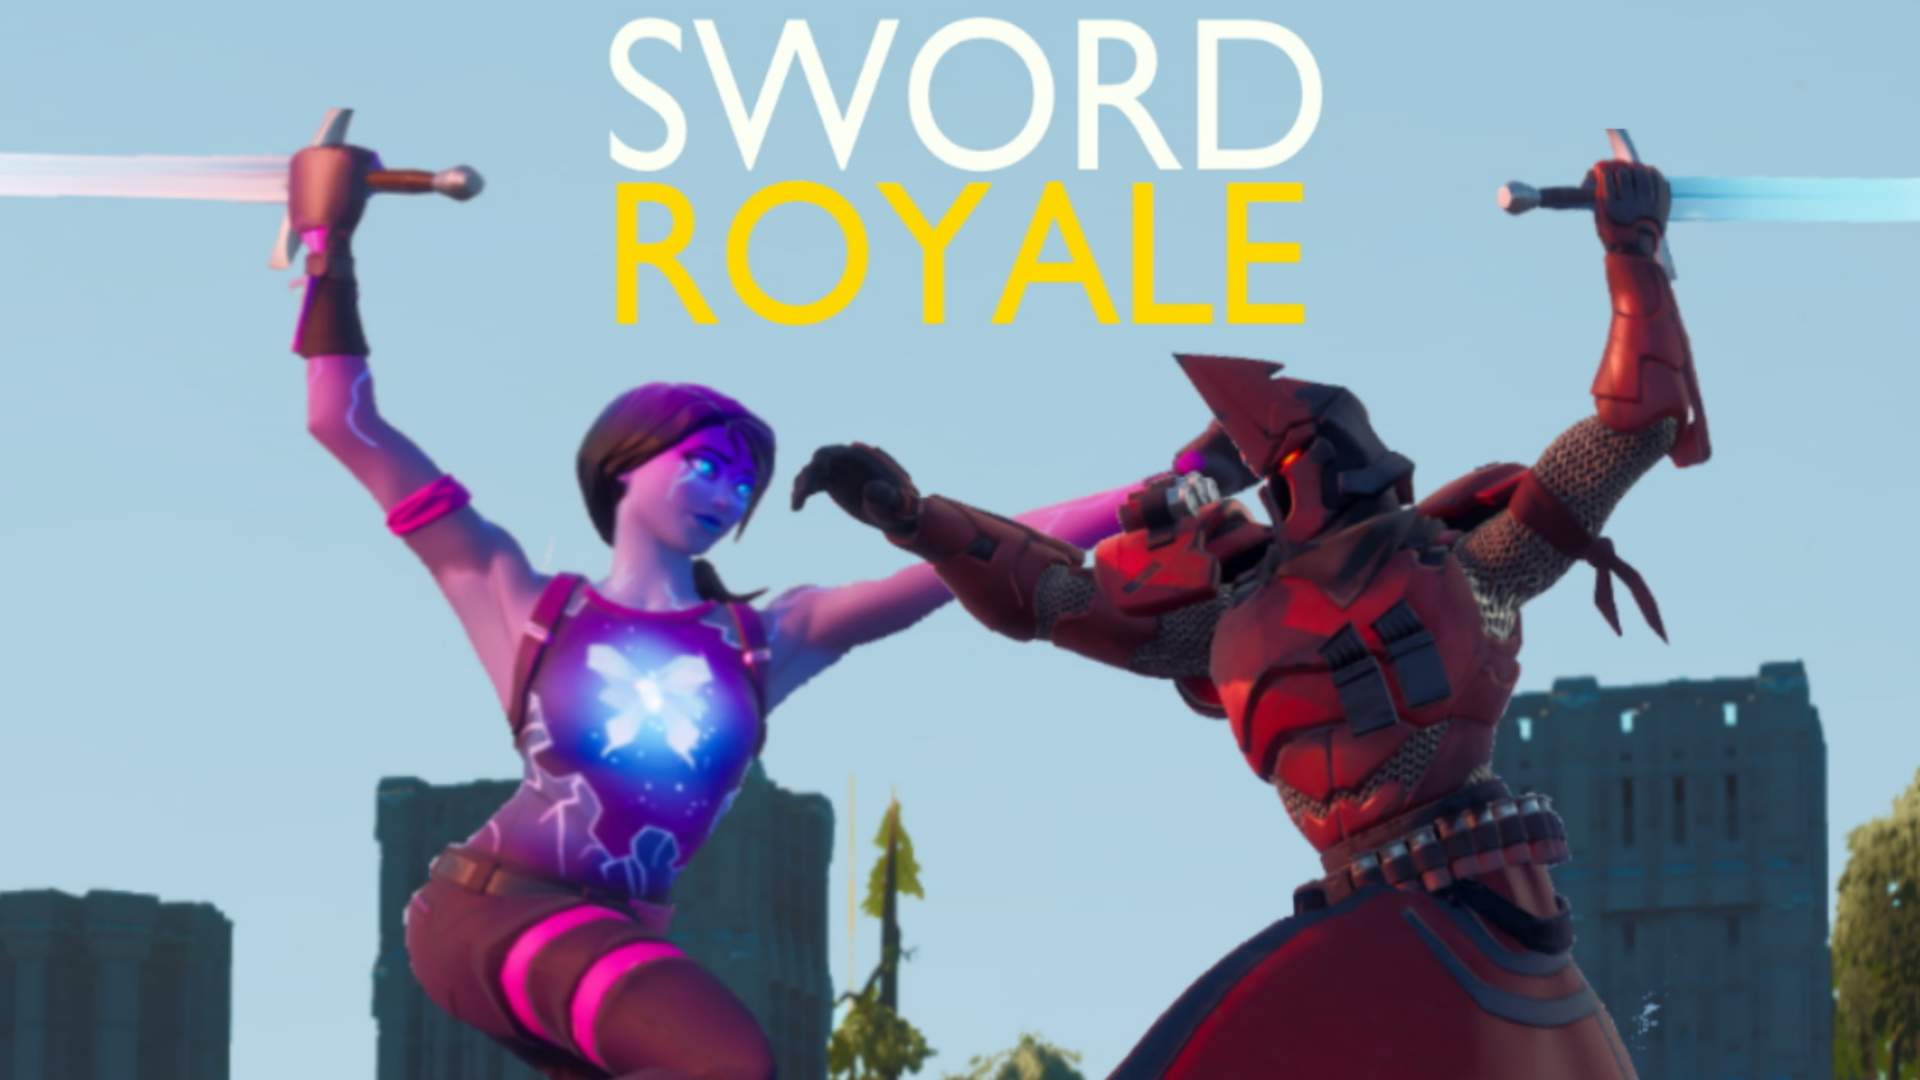 Sword Royale (sword Only Fight) - Fortnite Creative FFA and Fun Map Code.